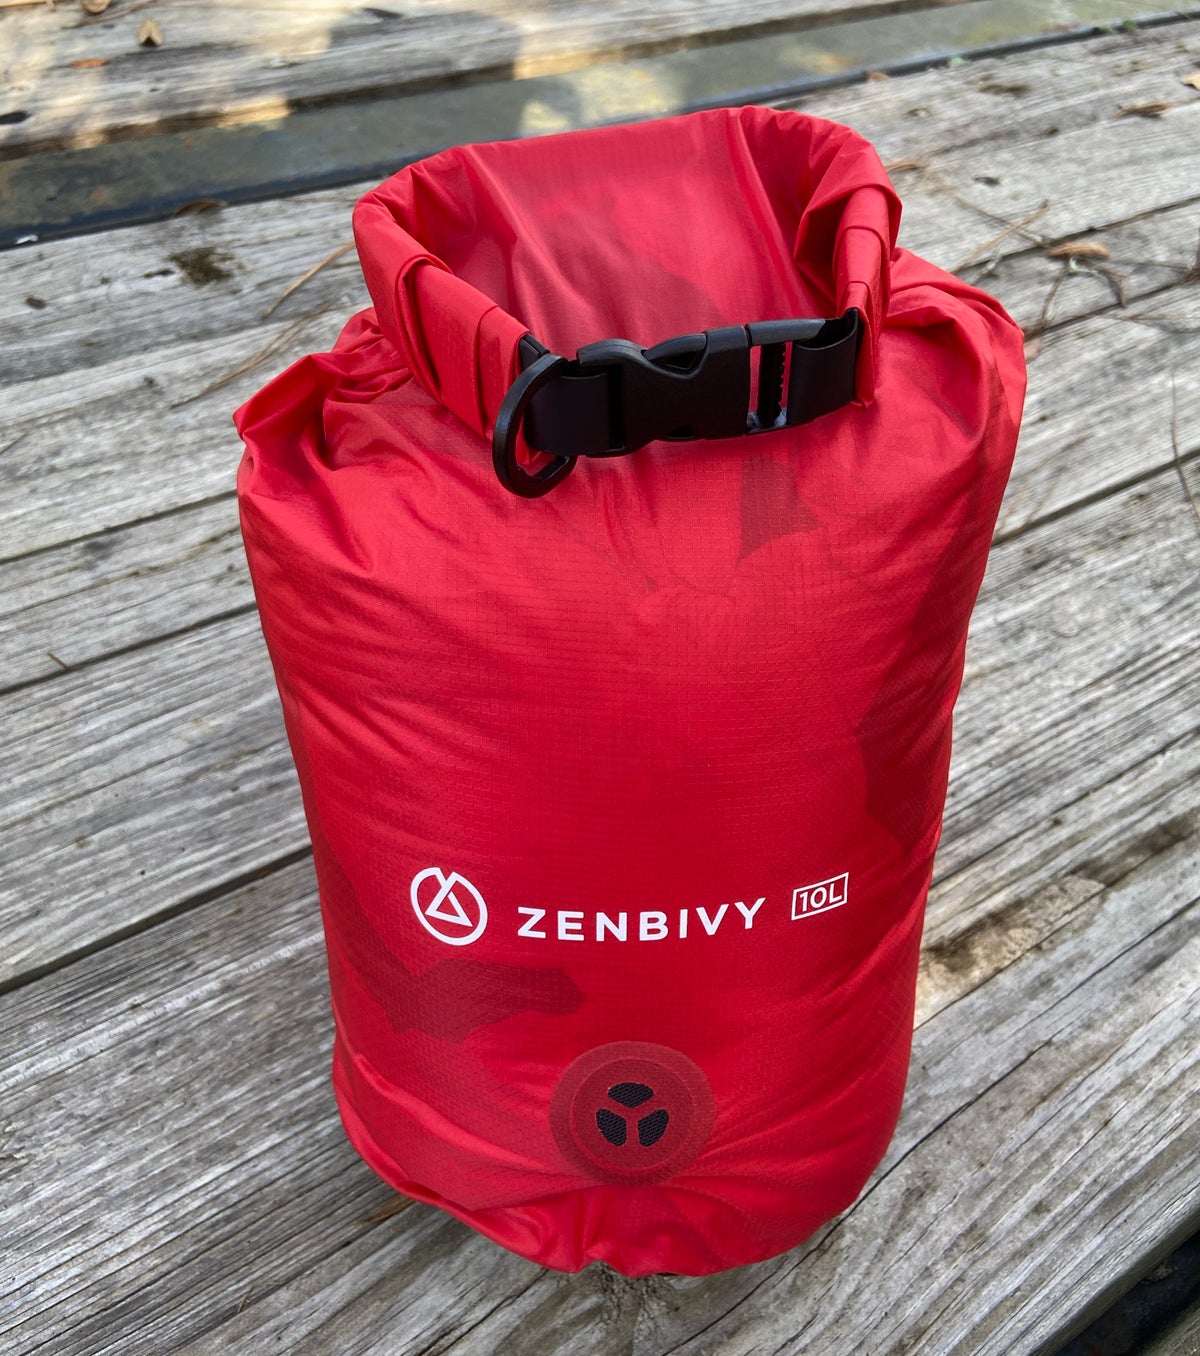 Zenbivy Dry Sack 10L Compressible Bag with Light Quilt inside (Photo © Russ Chastain)